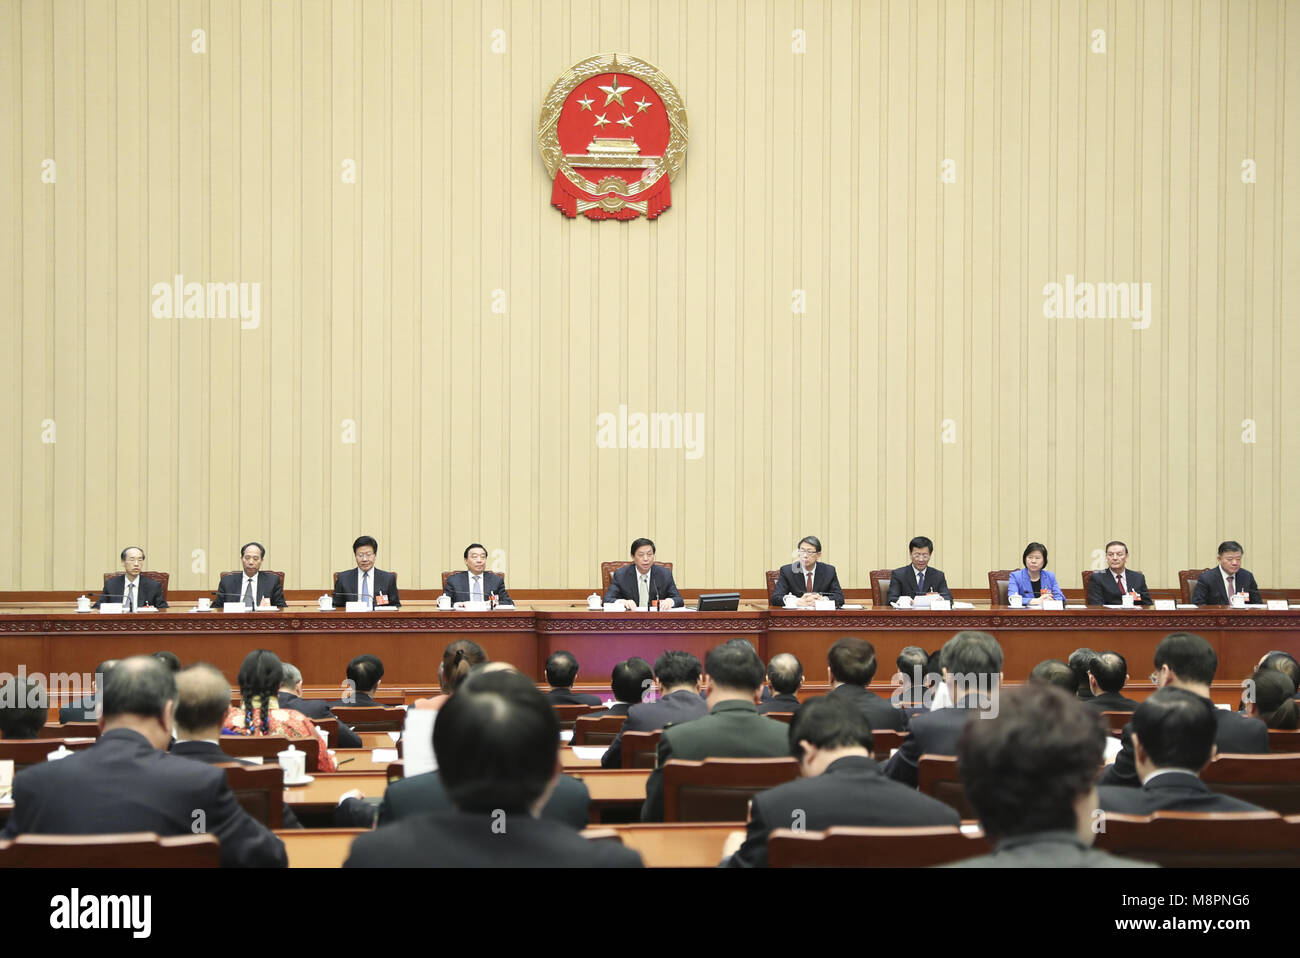 Beijing, China. 19th Mar, 2018. Li Zhanshu, executive chairperson of the presidium of the first session of the 13th National People's Congress (NPC), presides over the 11th meeting of the presidium at the Great Hall of the People in Beijing, capital of China, March 19, 2018. Credit: Xie Huanchi/Xinhua/Alamy Live News Stock Photo